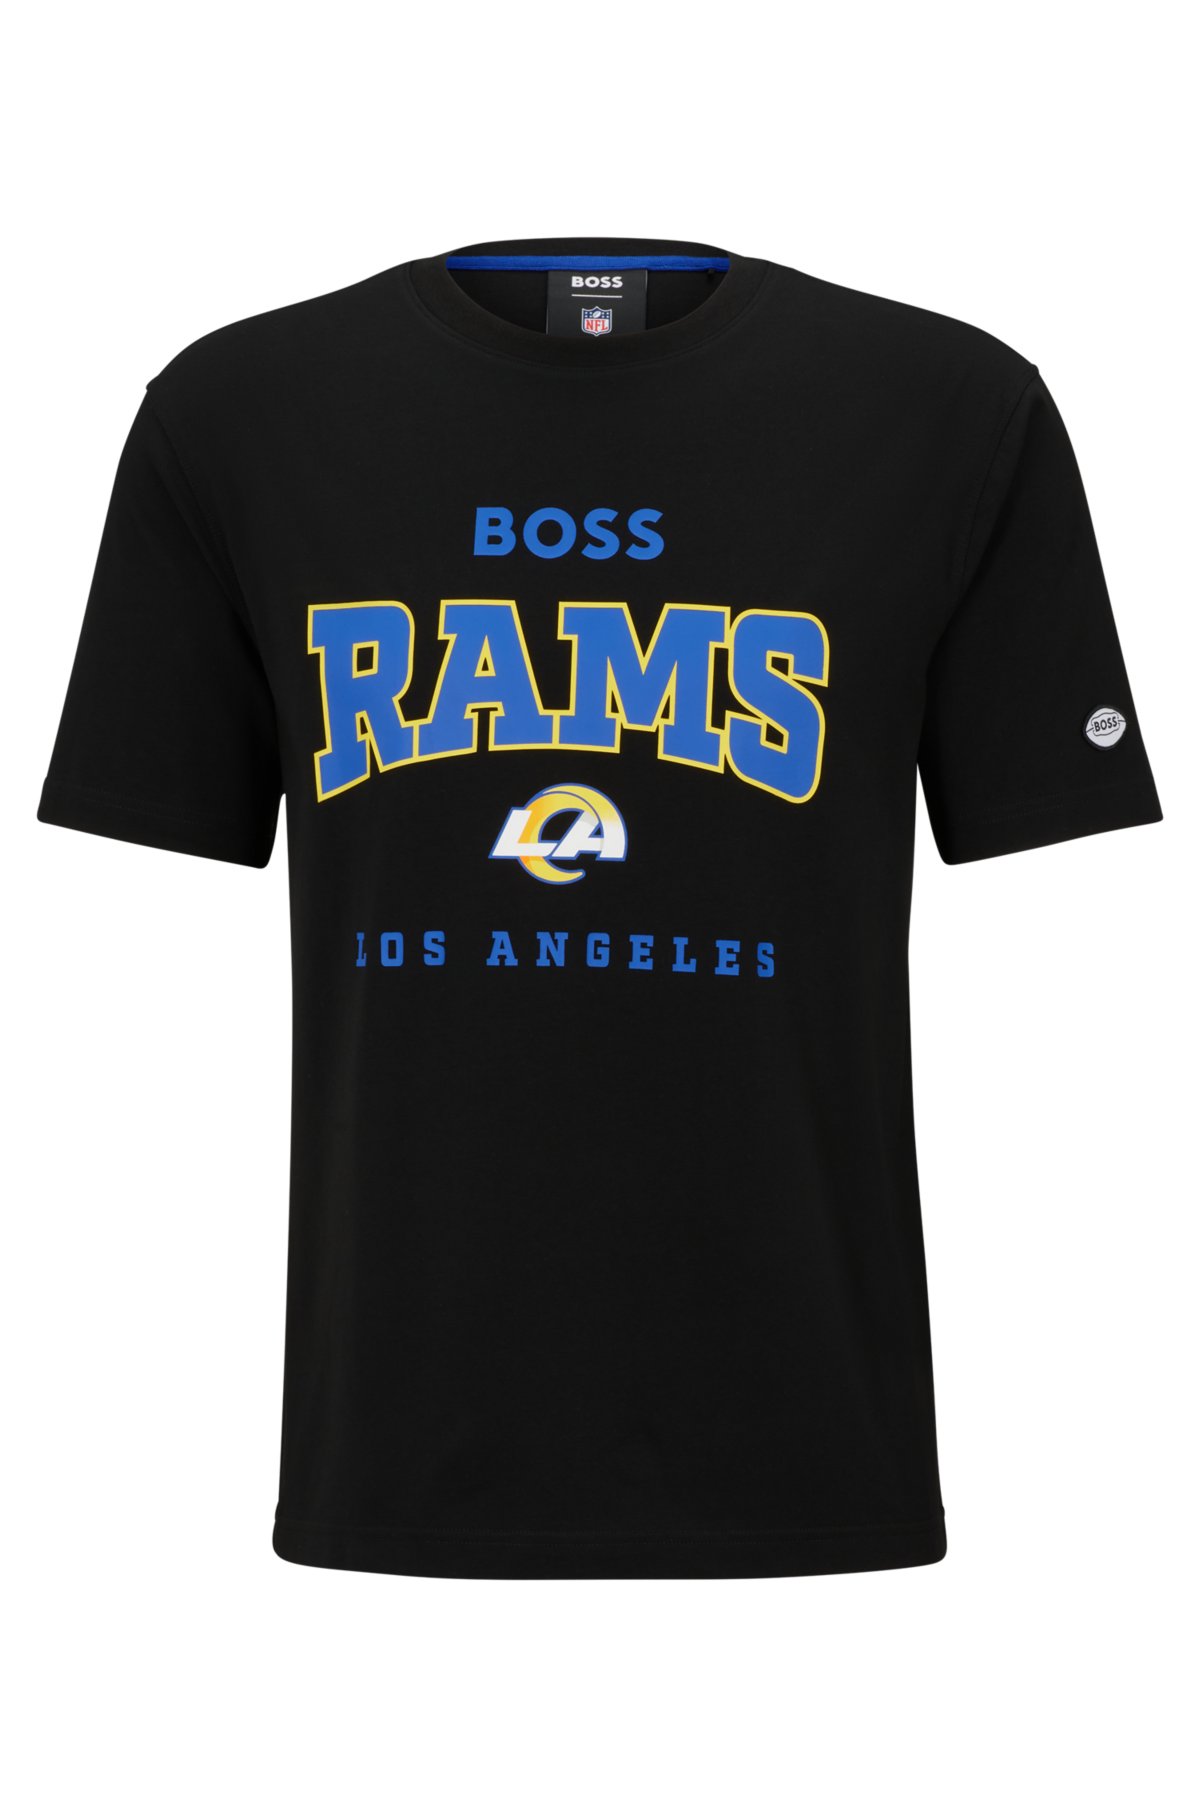 BOSS x NFL stretch-cotton T-shirt with collaborative branding, Rams